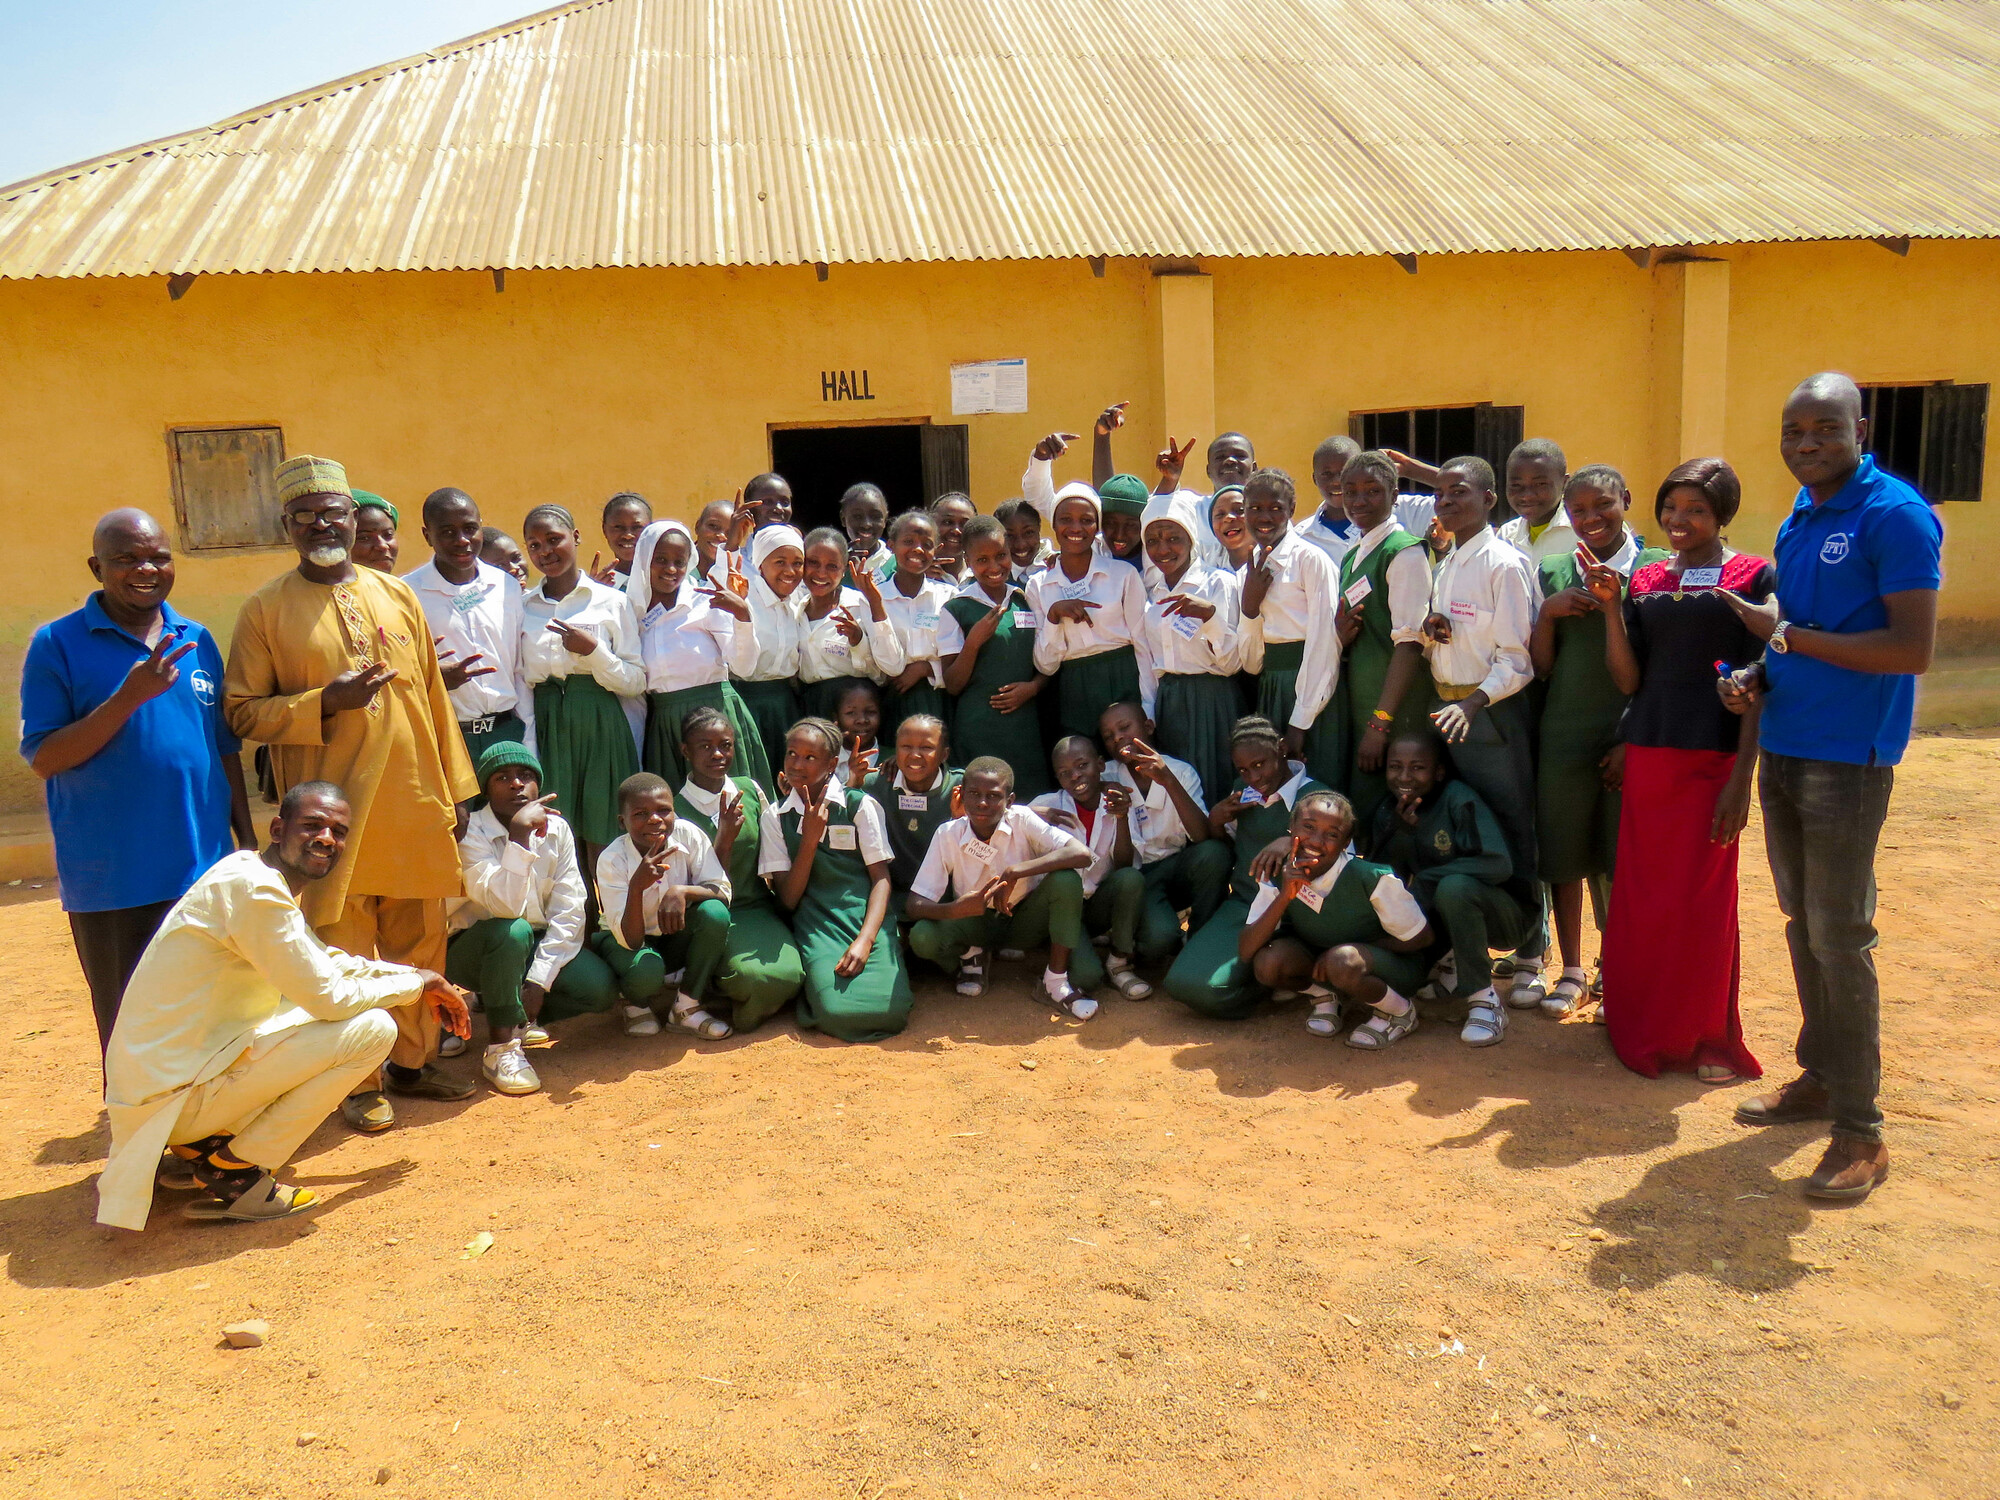 A group of students and teachers standing for a photo in front of a school